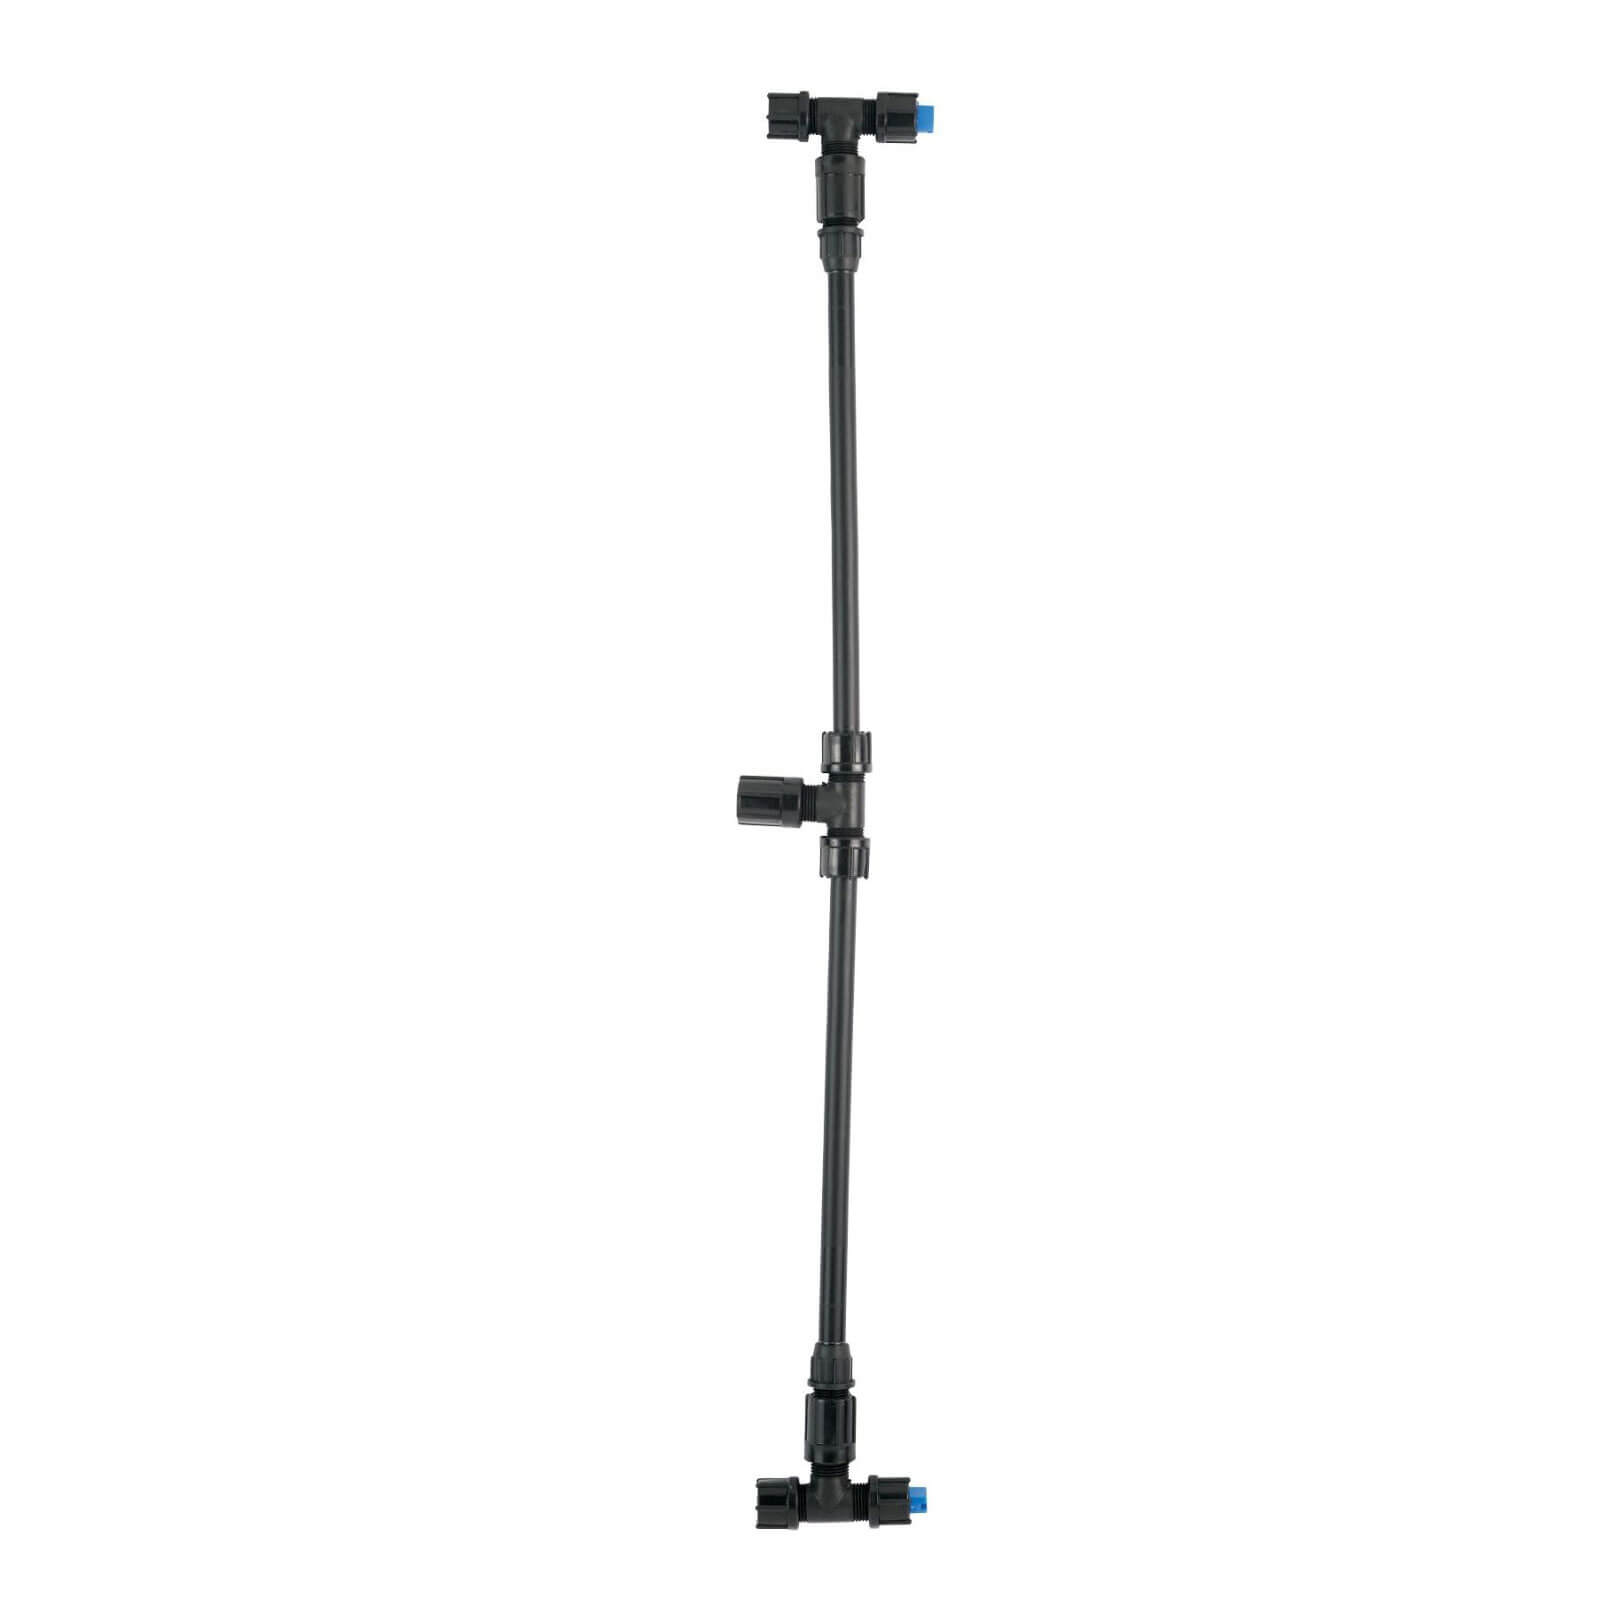 Image of Solo Front Mount 2 Nozzle Spray Boom for Pressure Sprayers 0.6m